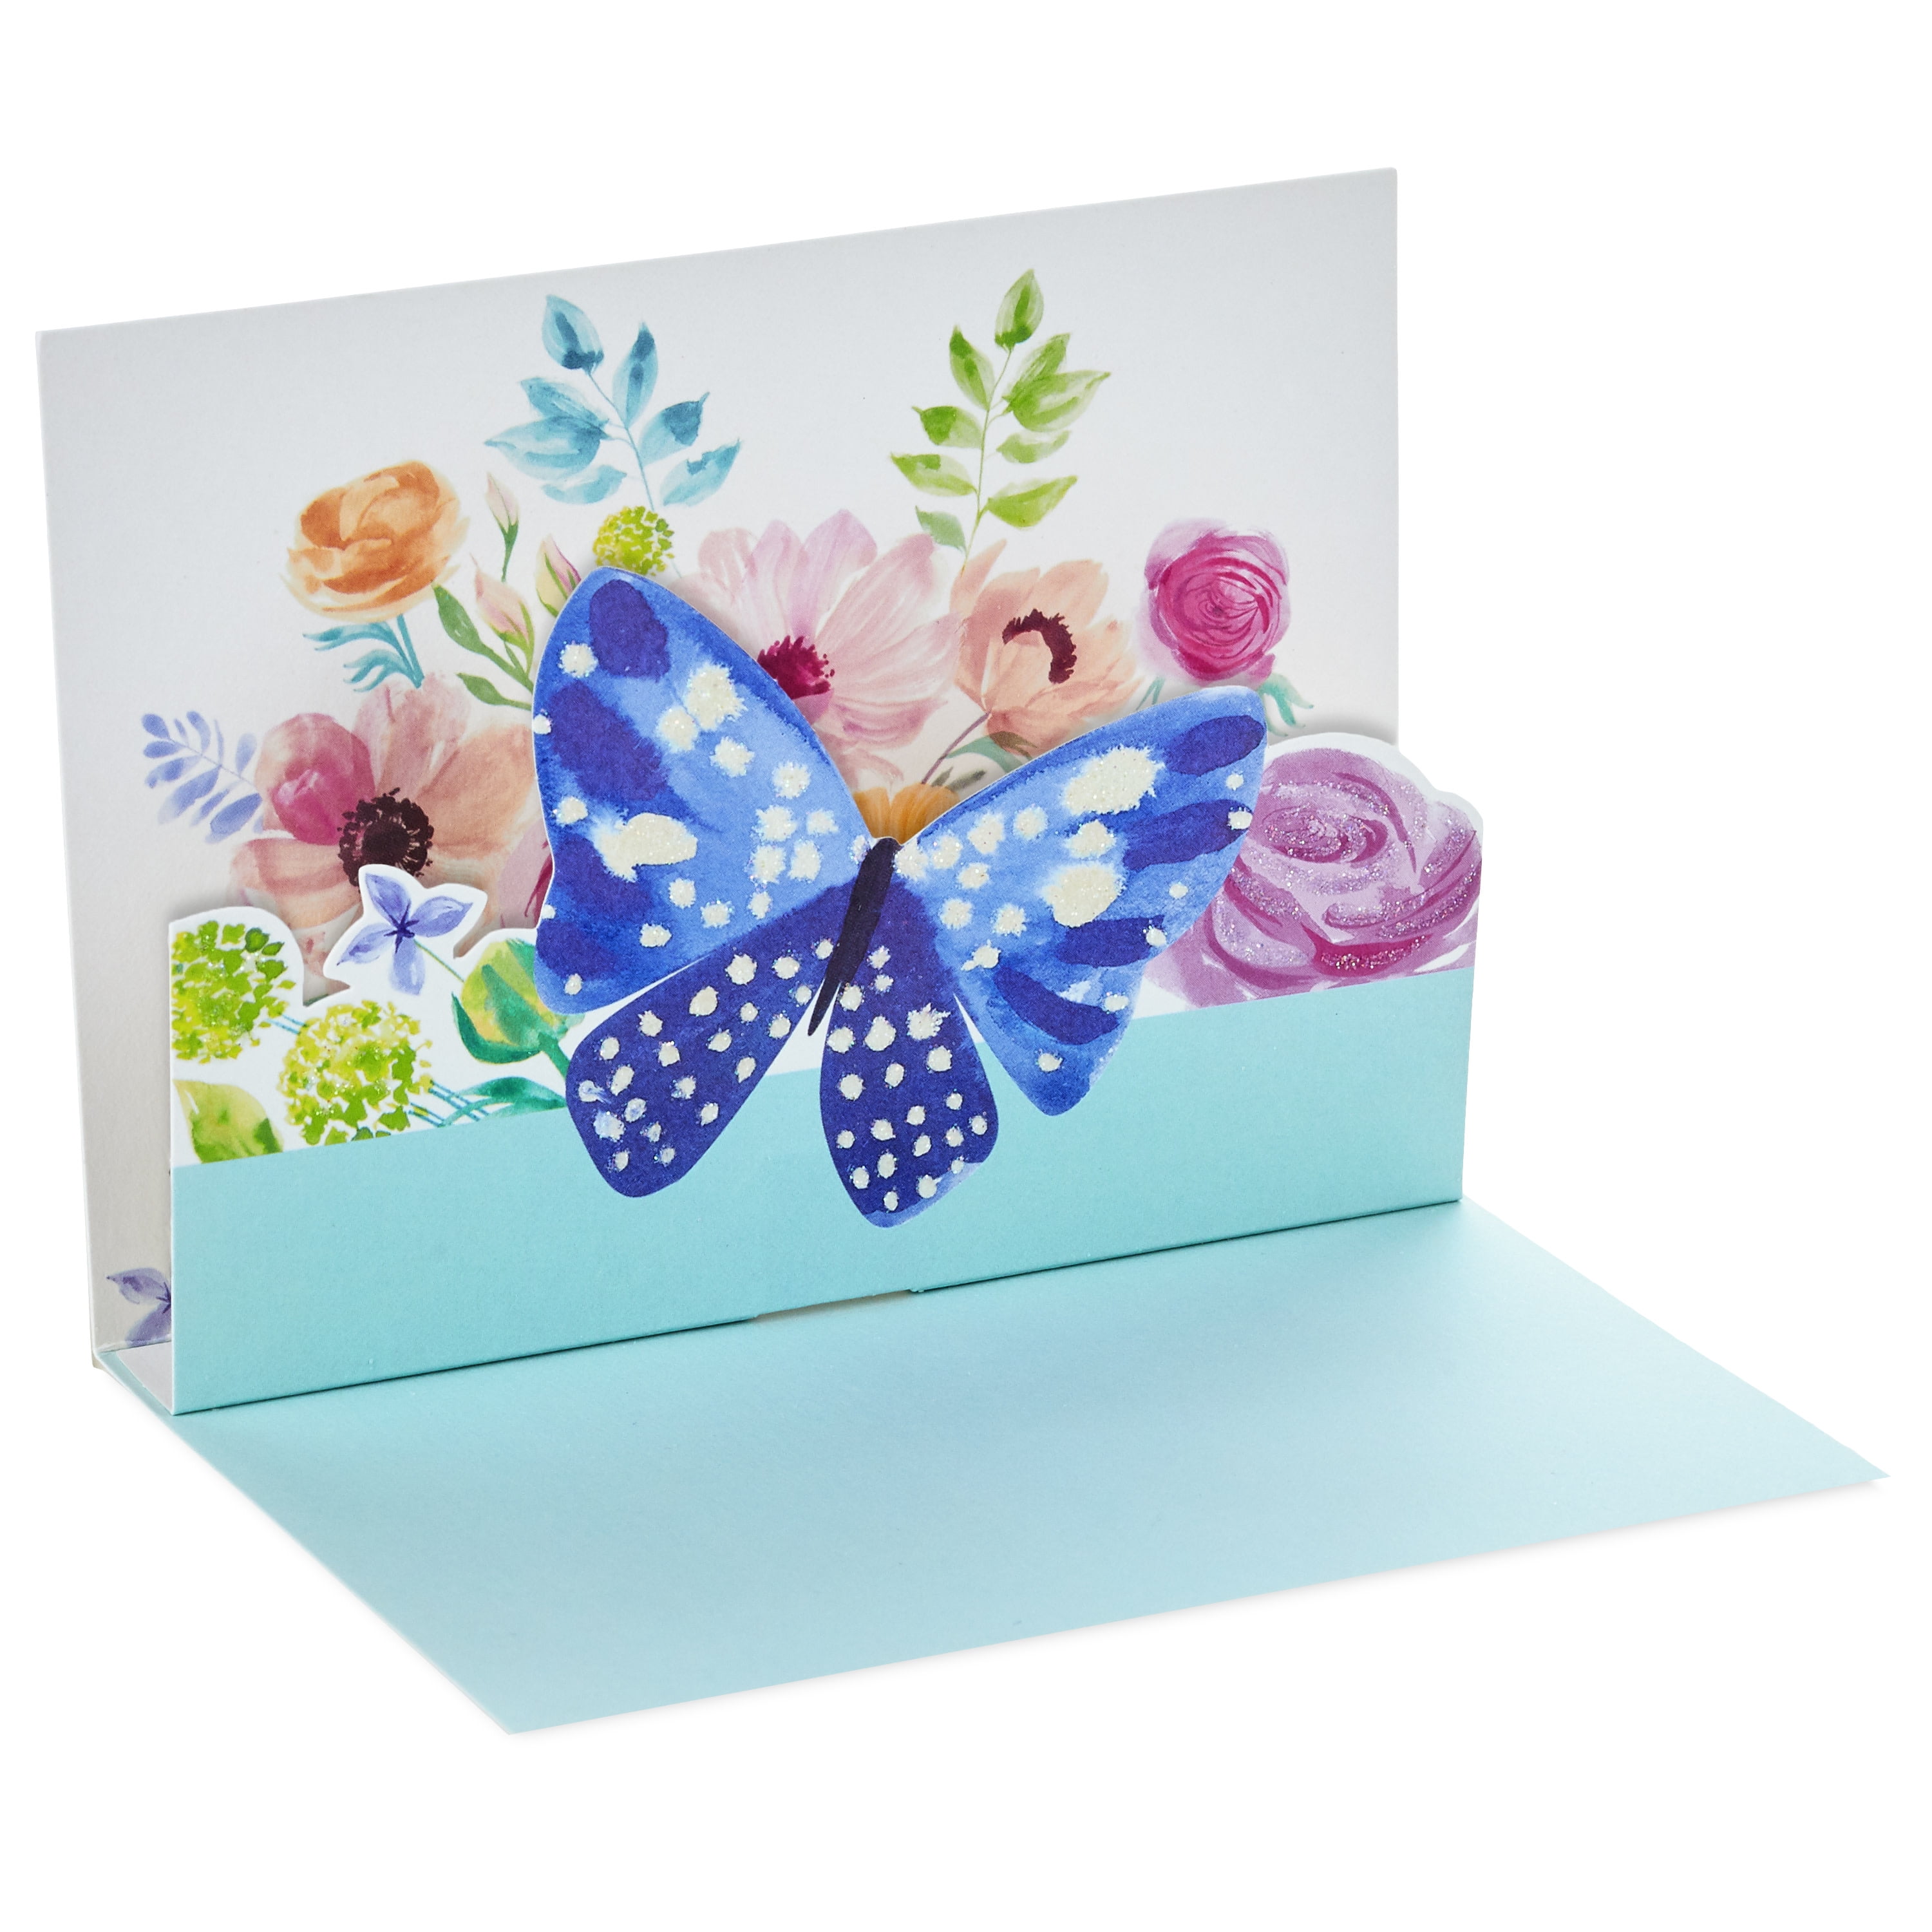 Details about   3D Glitter Pop-Up Greeting Birthday Card w/Gift Card Holder~Bees And Daisies 